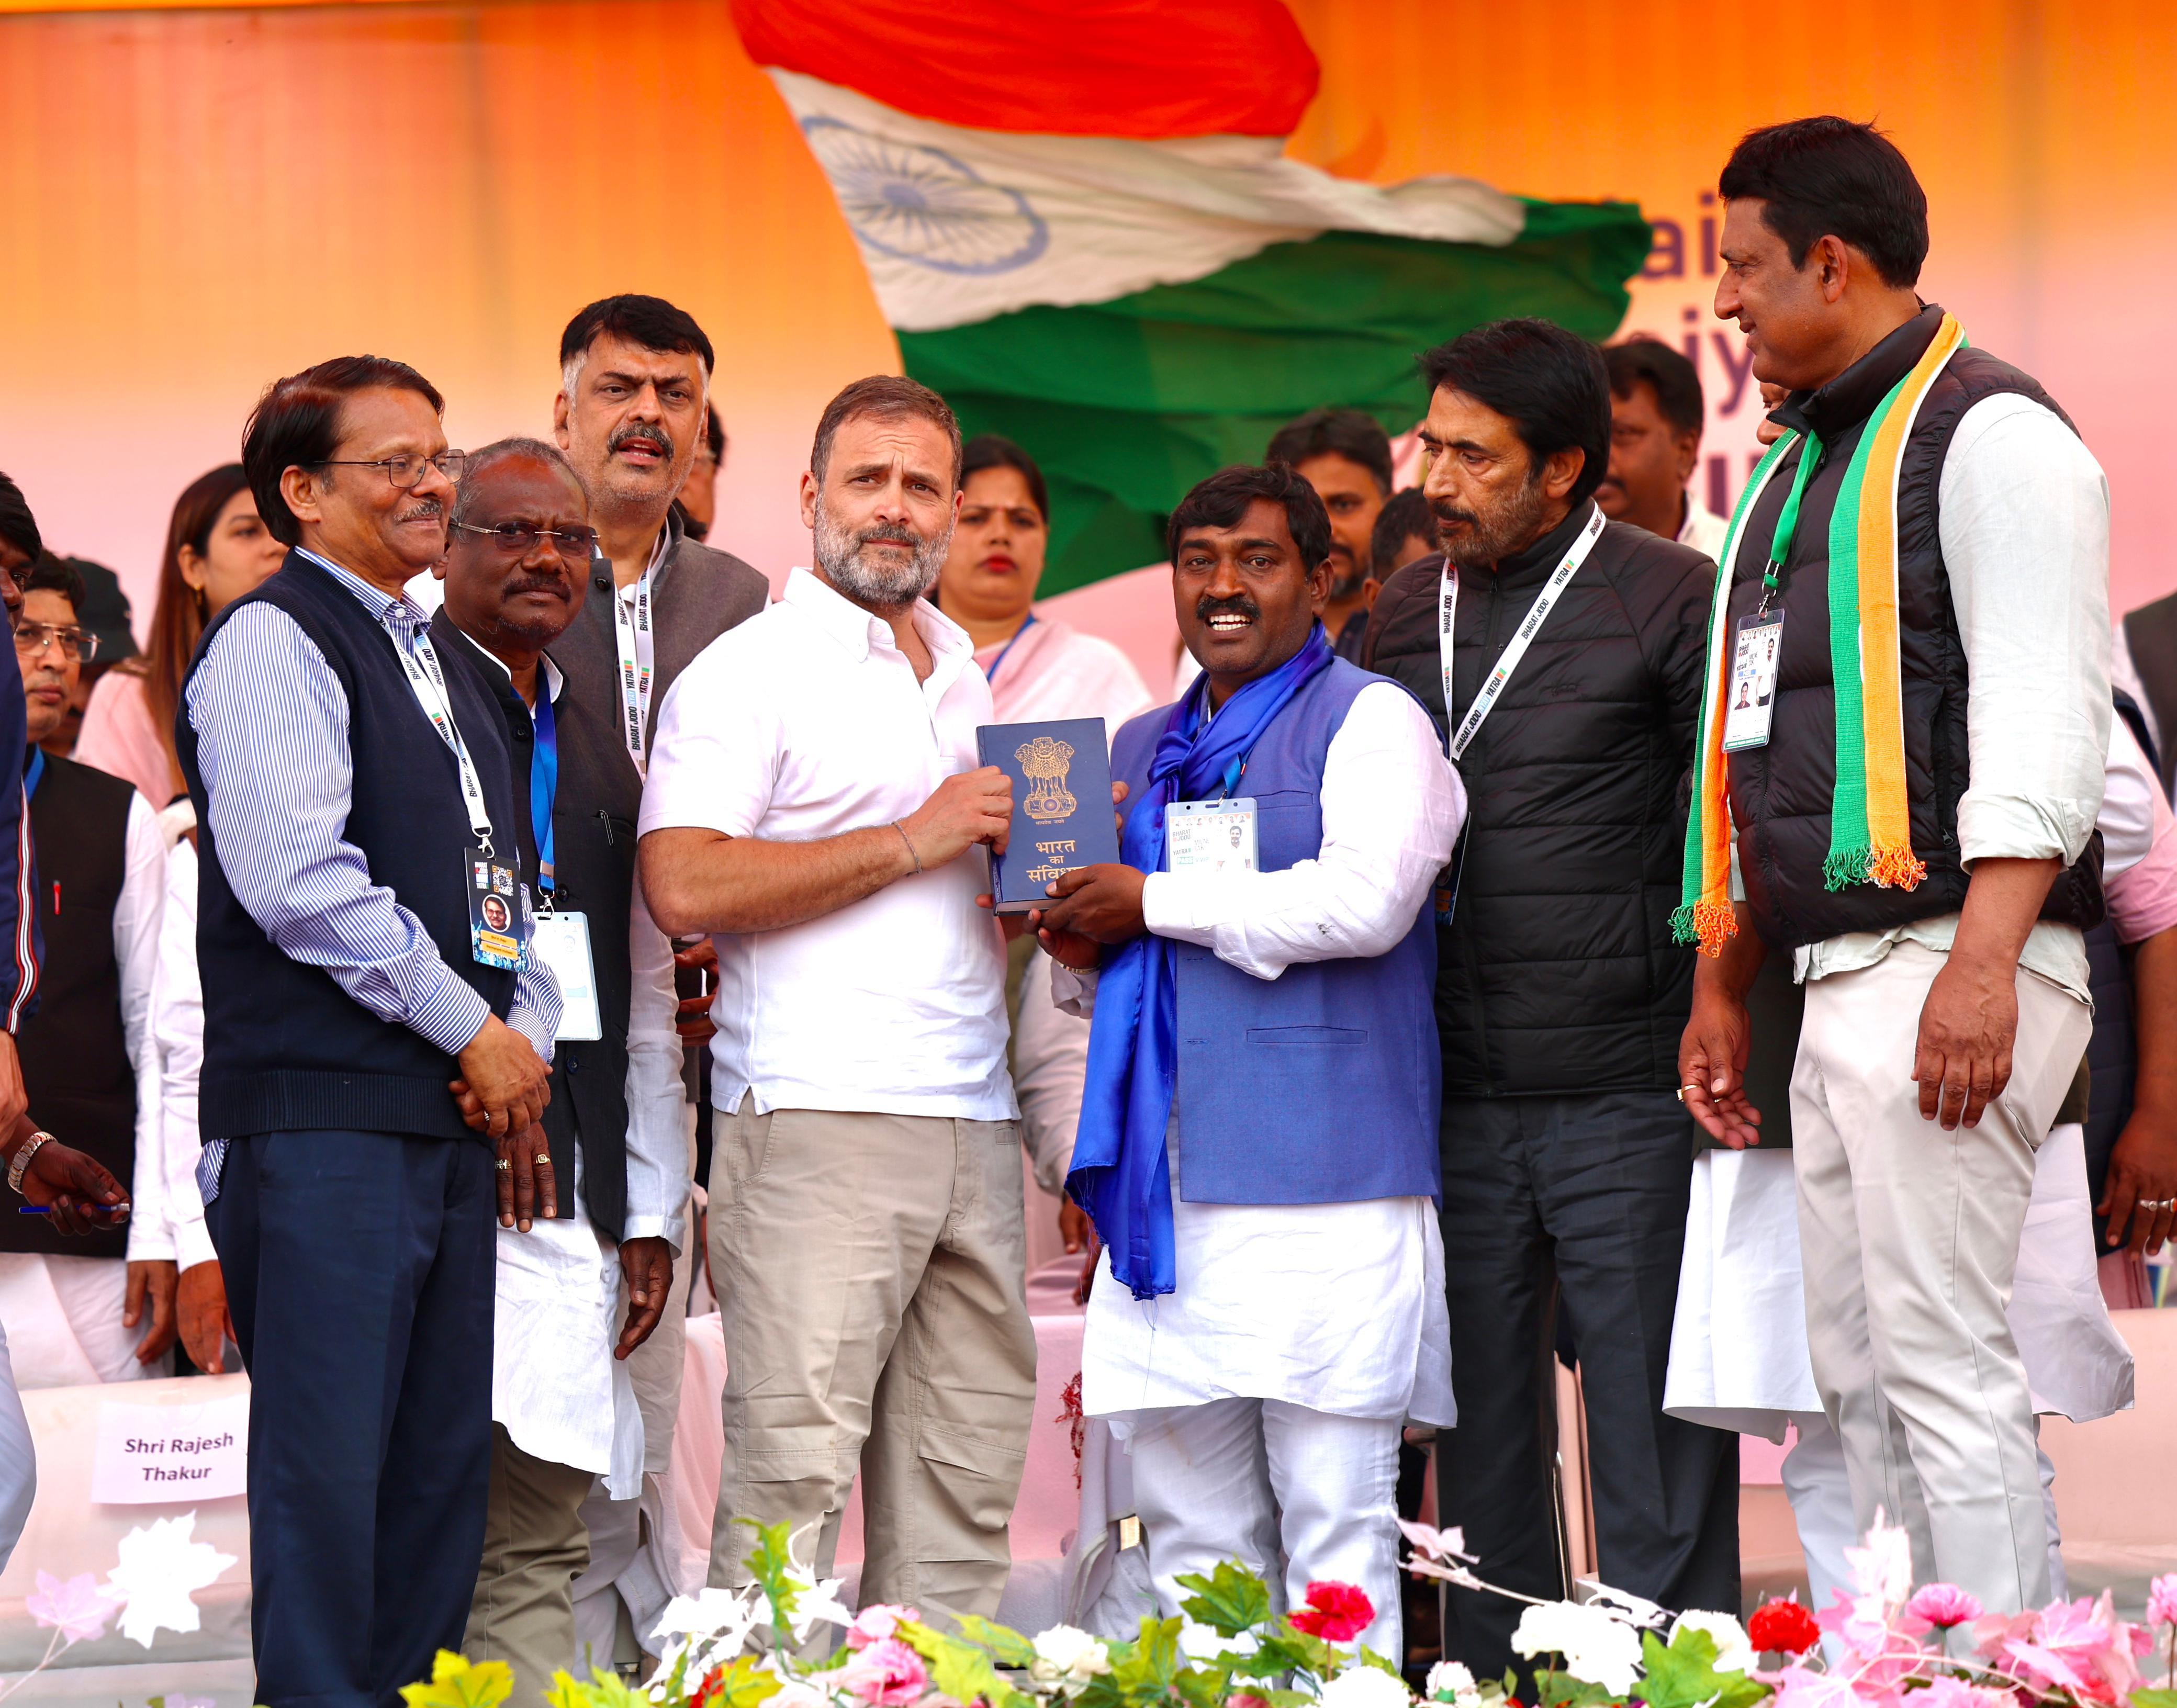 Rahul Gandhi With Local Leaders In Jharkhand